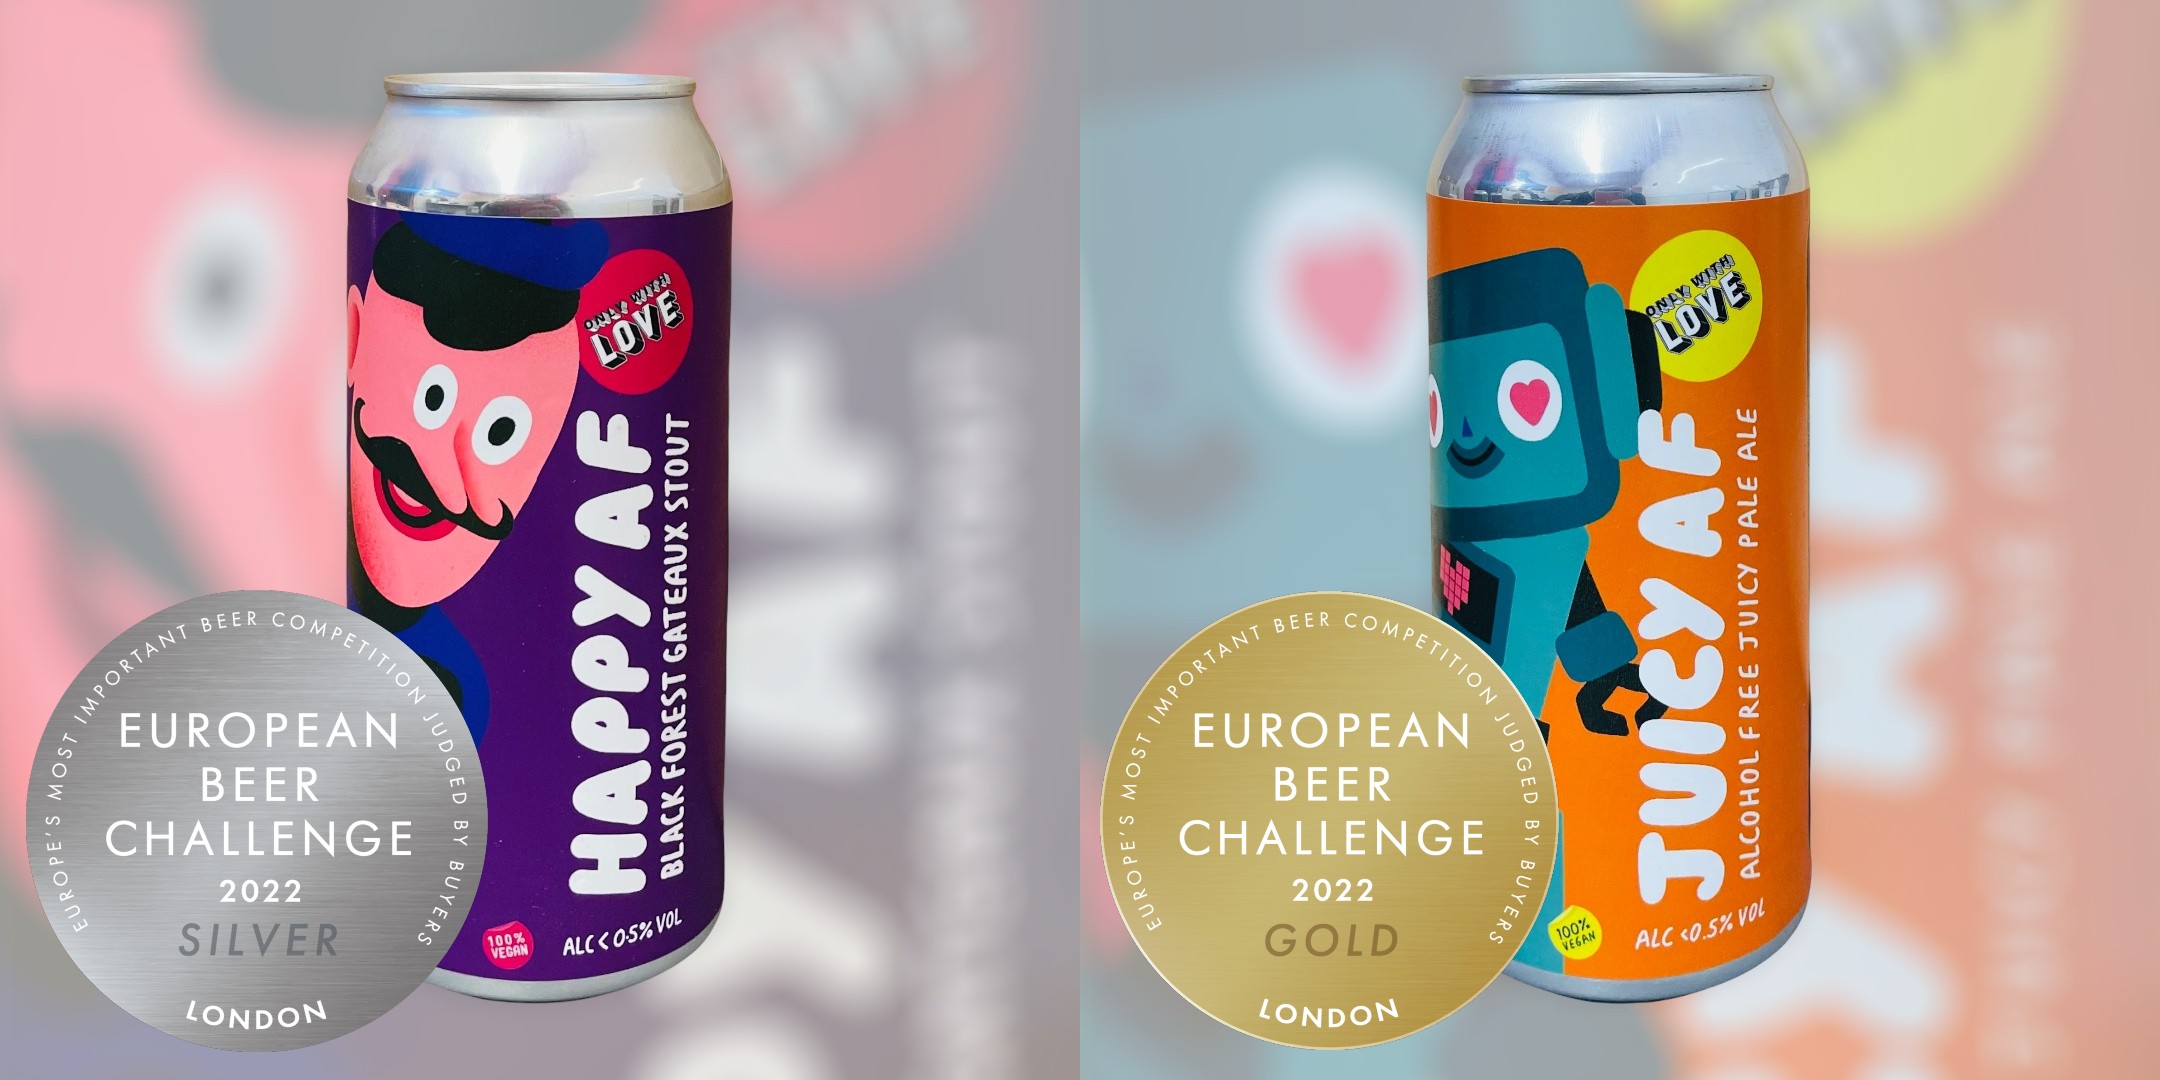 Only With Love Brewery Wins Gold and Silver Awards for its AF Beers at the 2022 European Beer Challenge